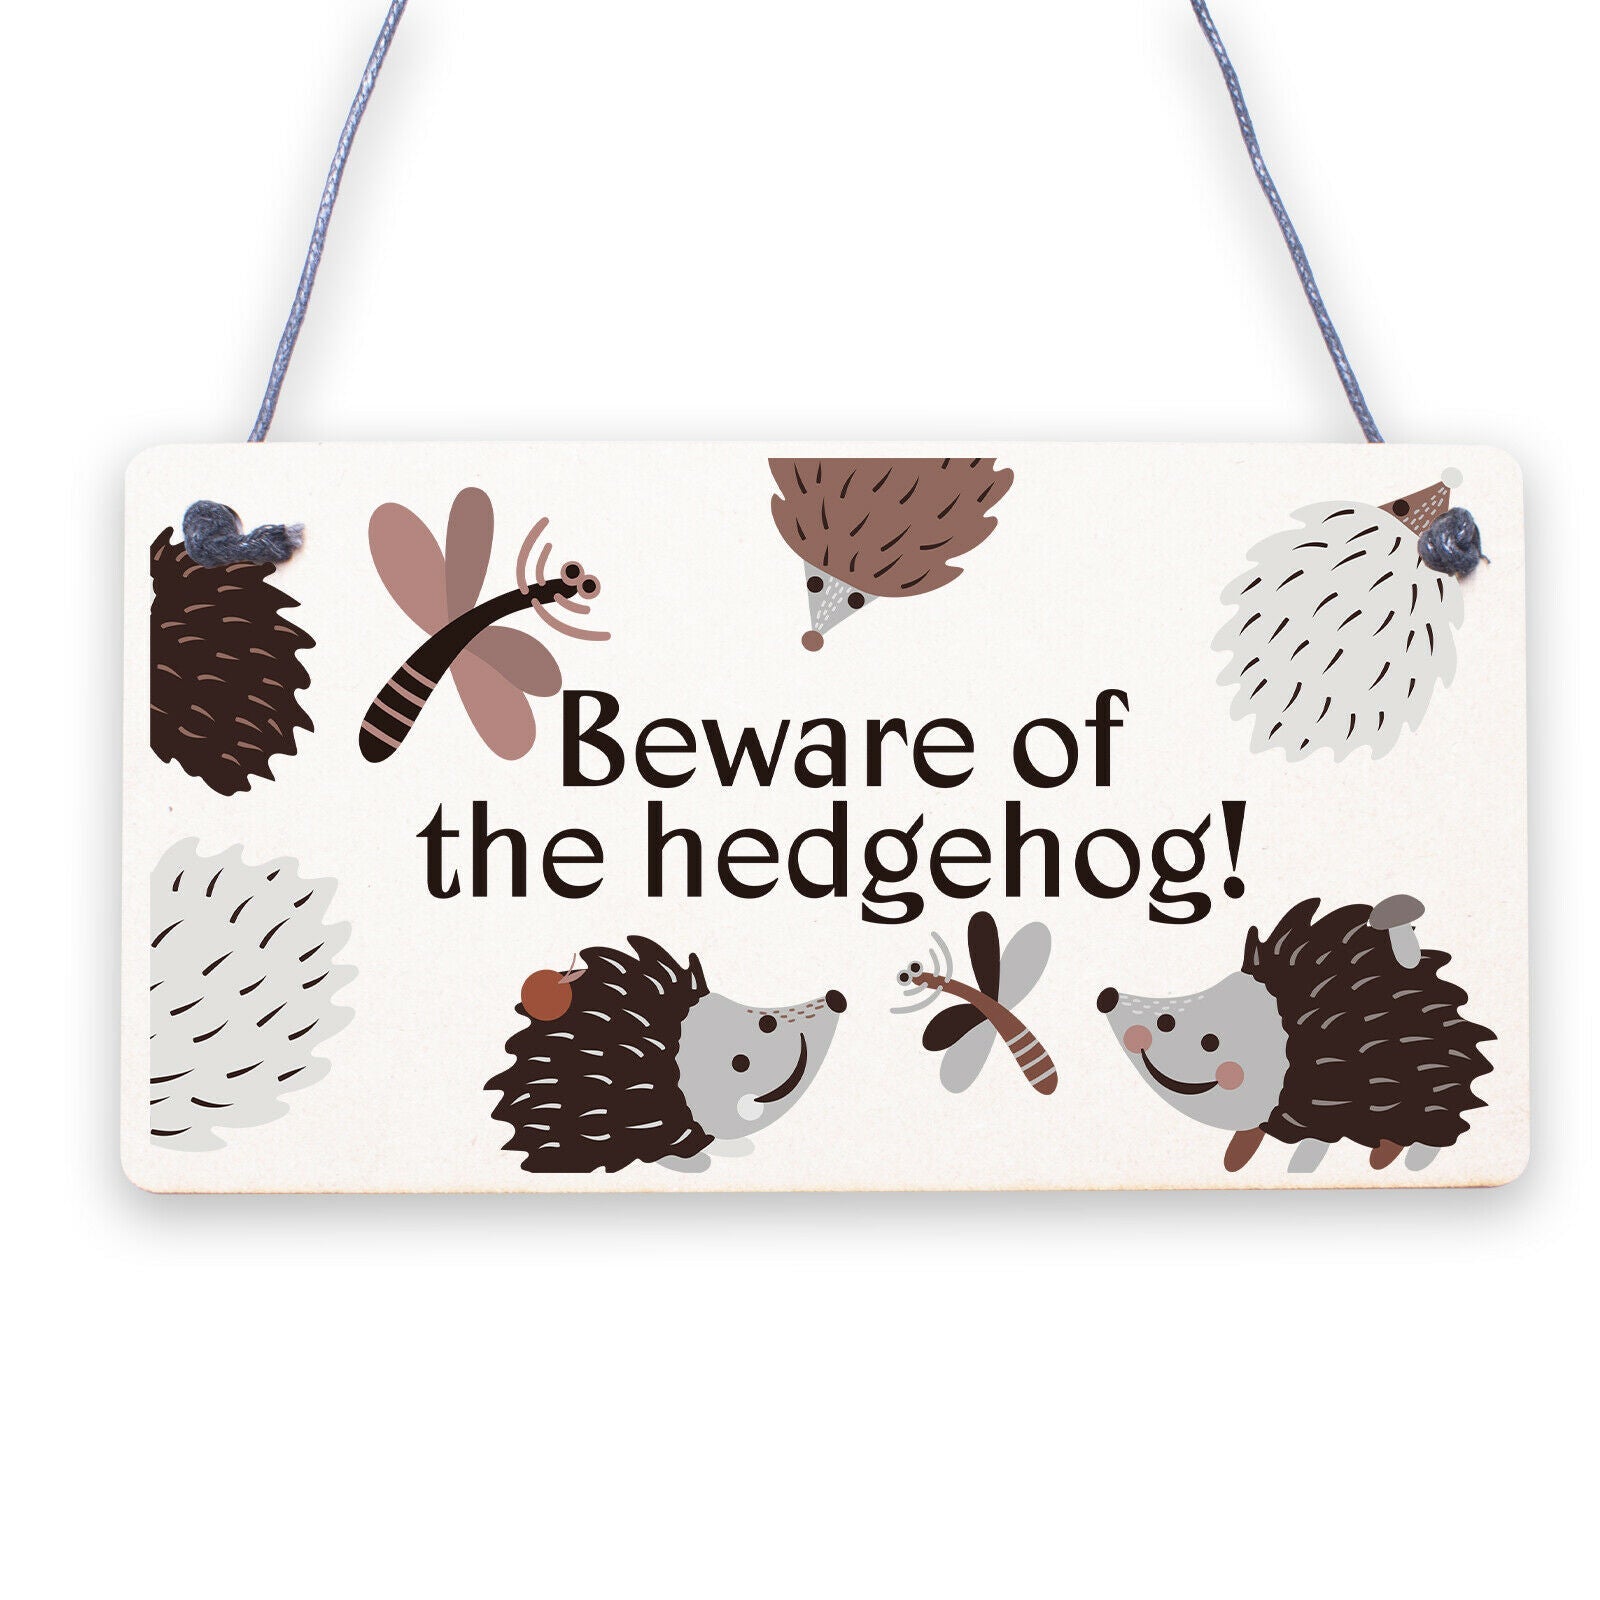 Beware Of The Hedgehog Novelty Wooden Hanging Shabby Chic Plaque Animal Sign